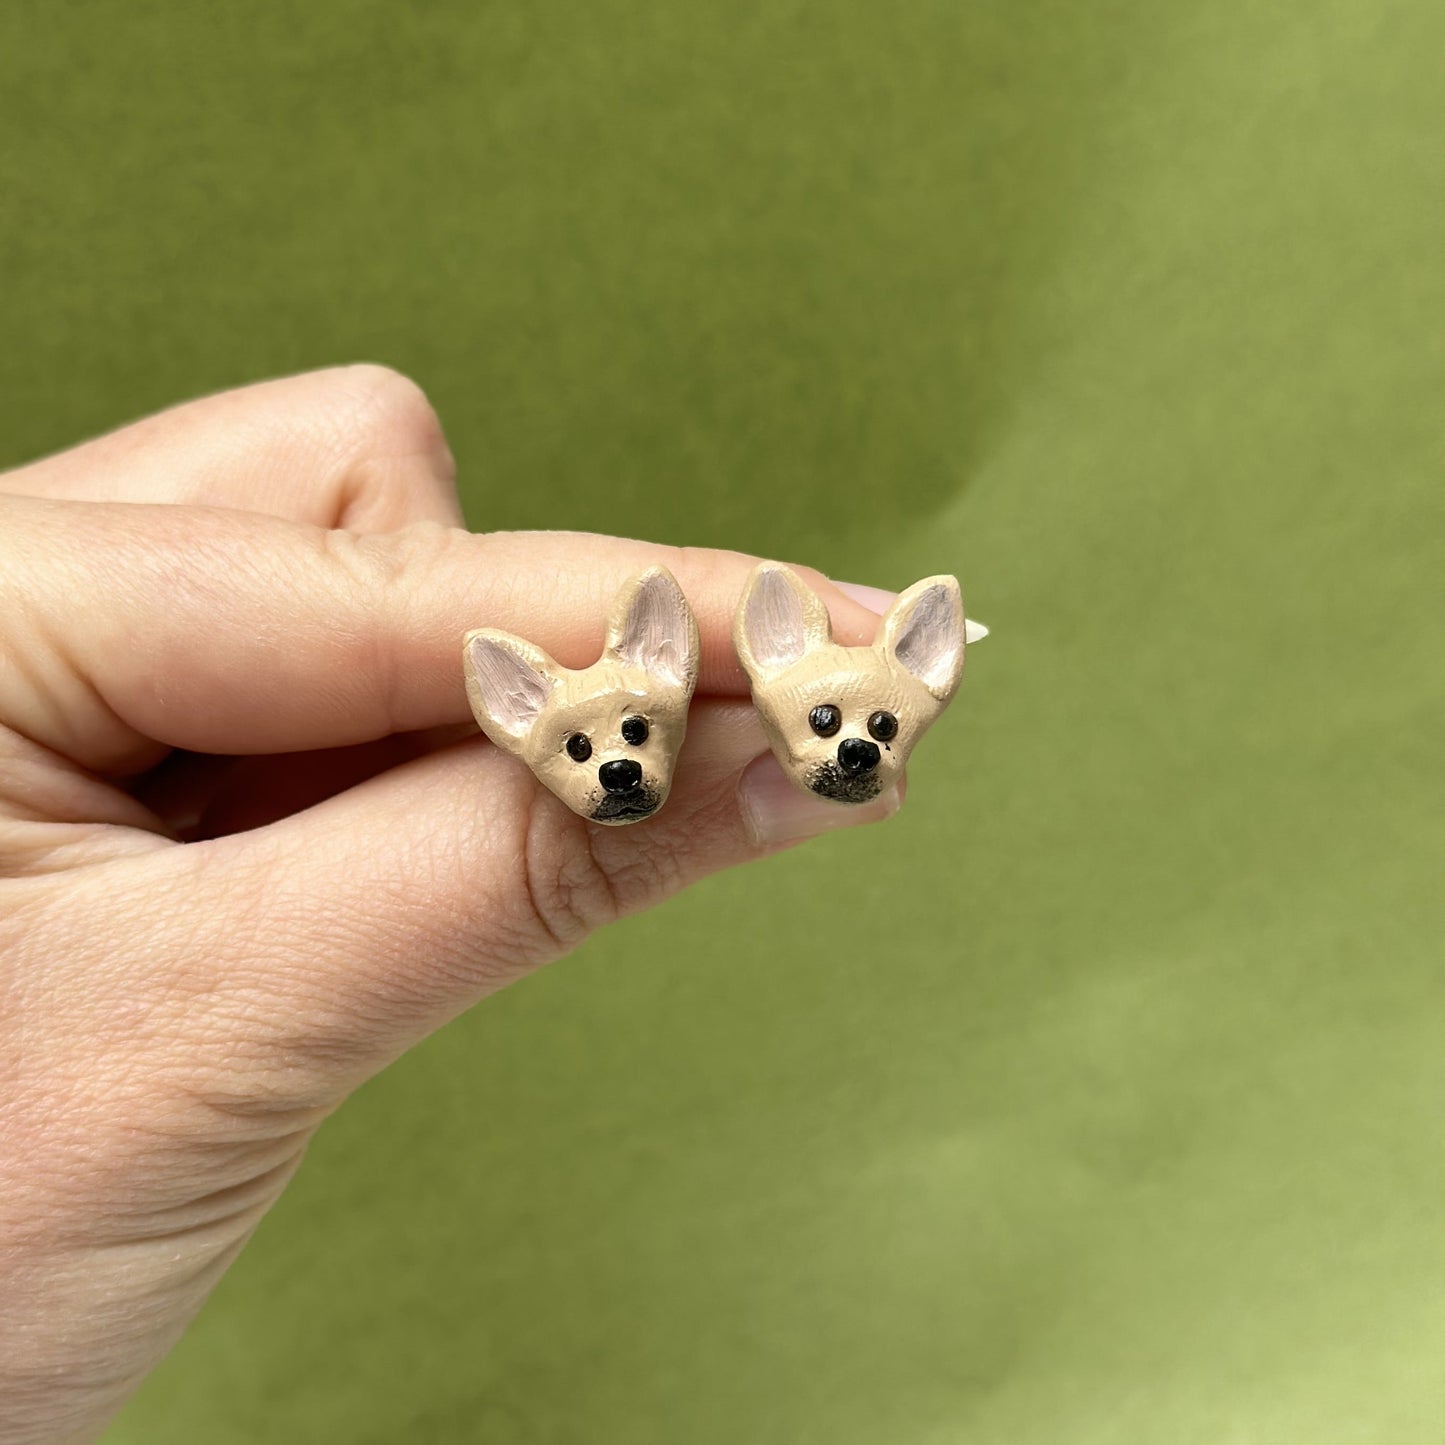 Handmade Chihuahua stud earrings by Pawfect Love, positioned in front of green background